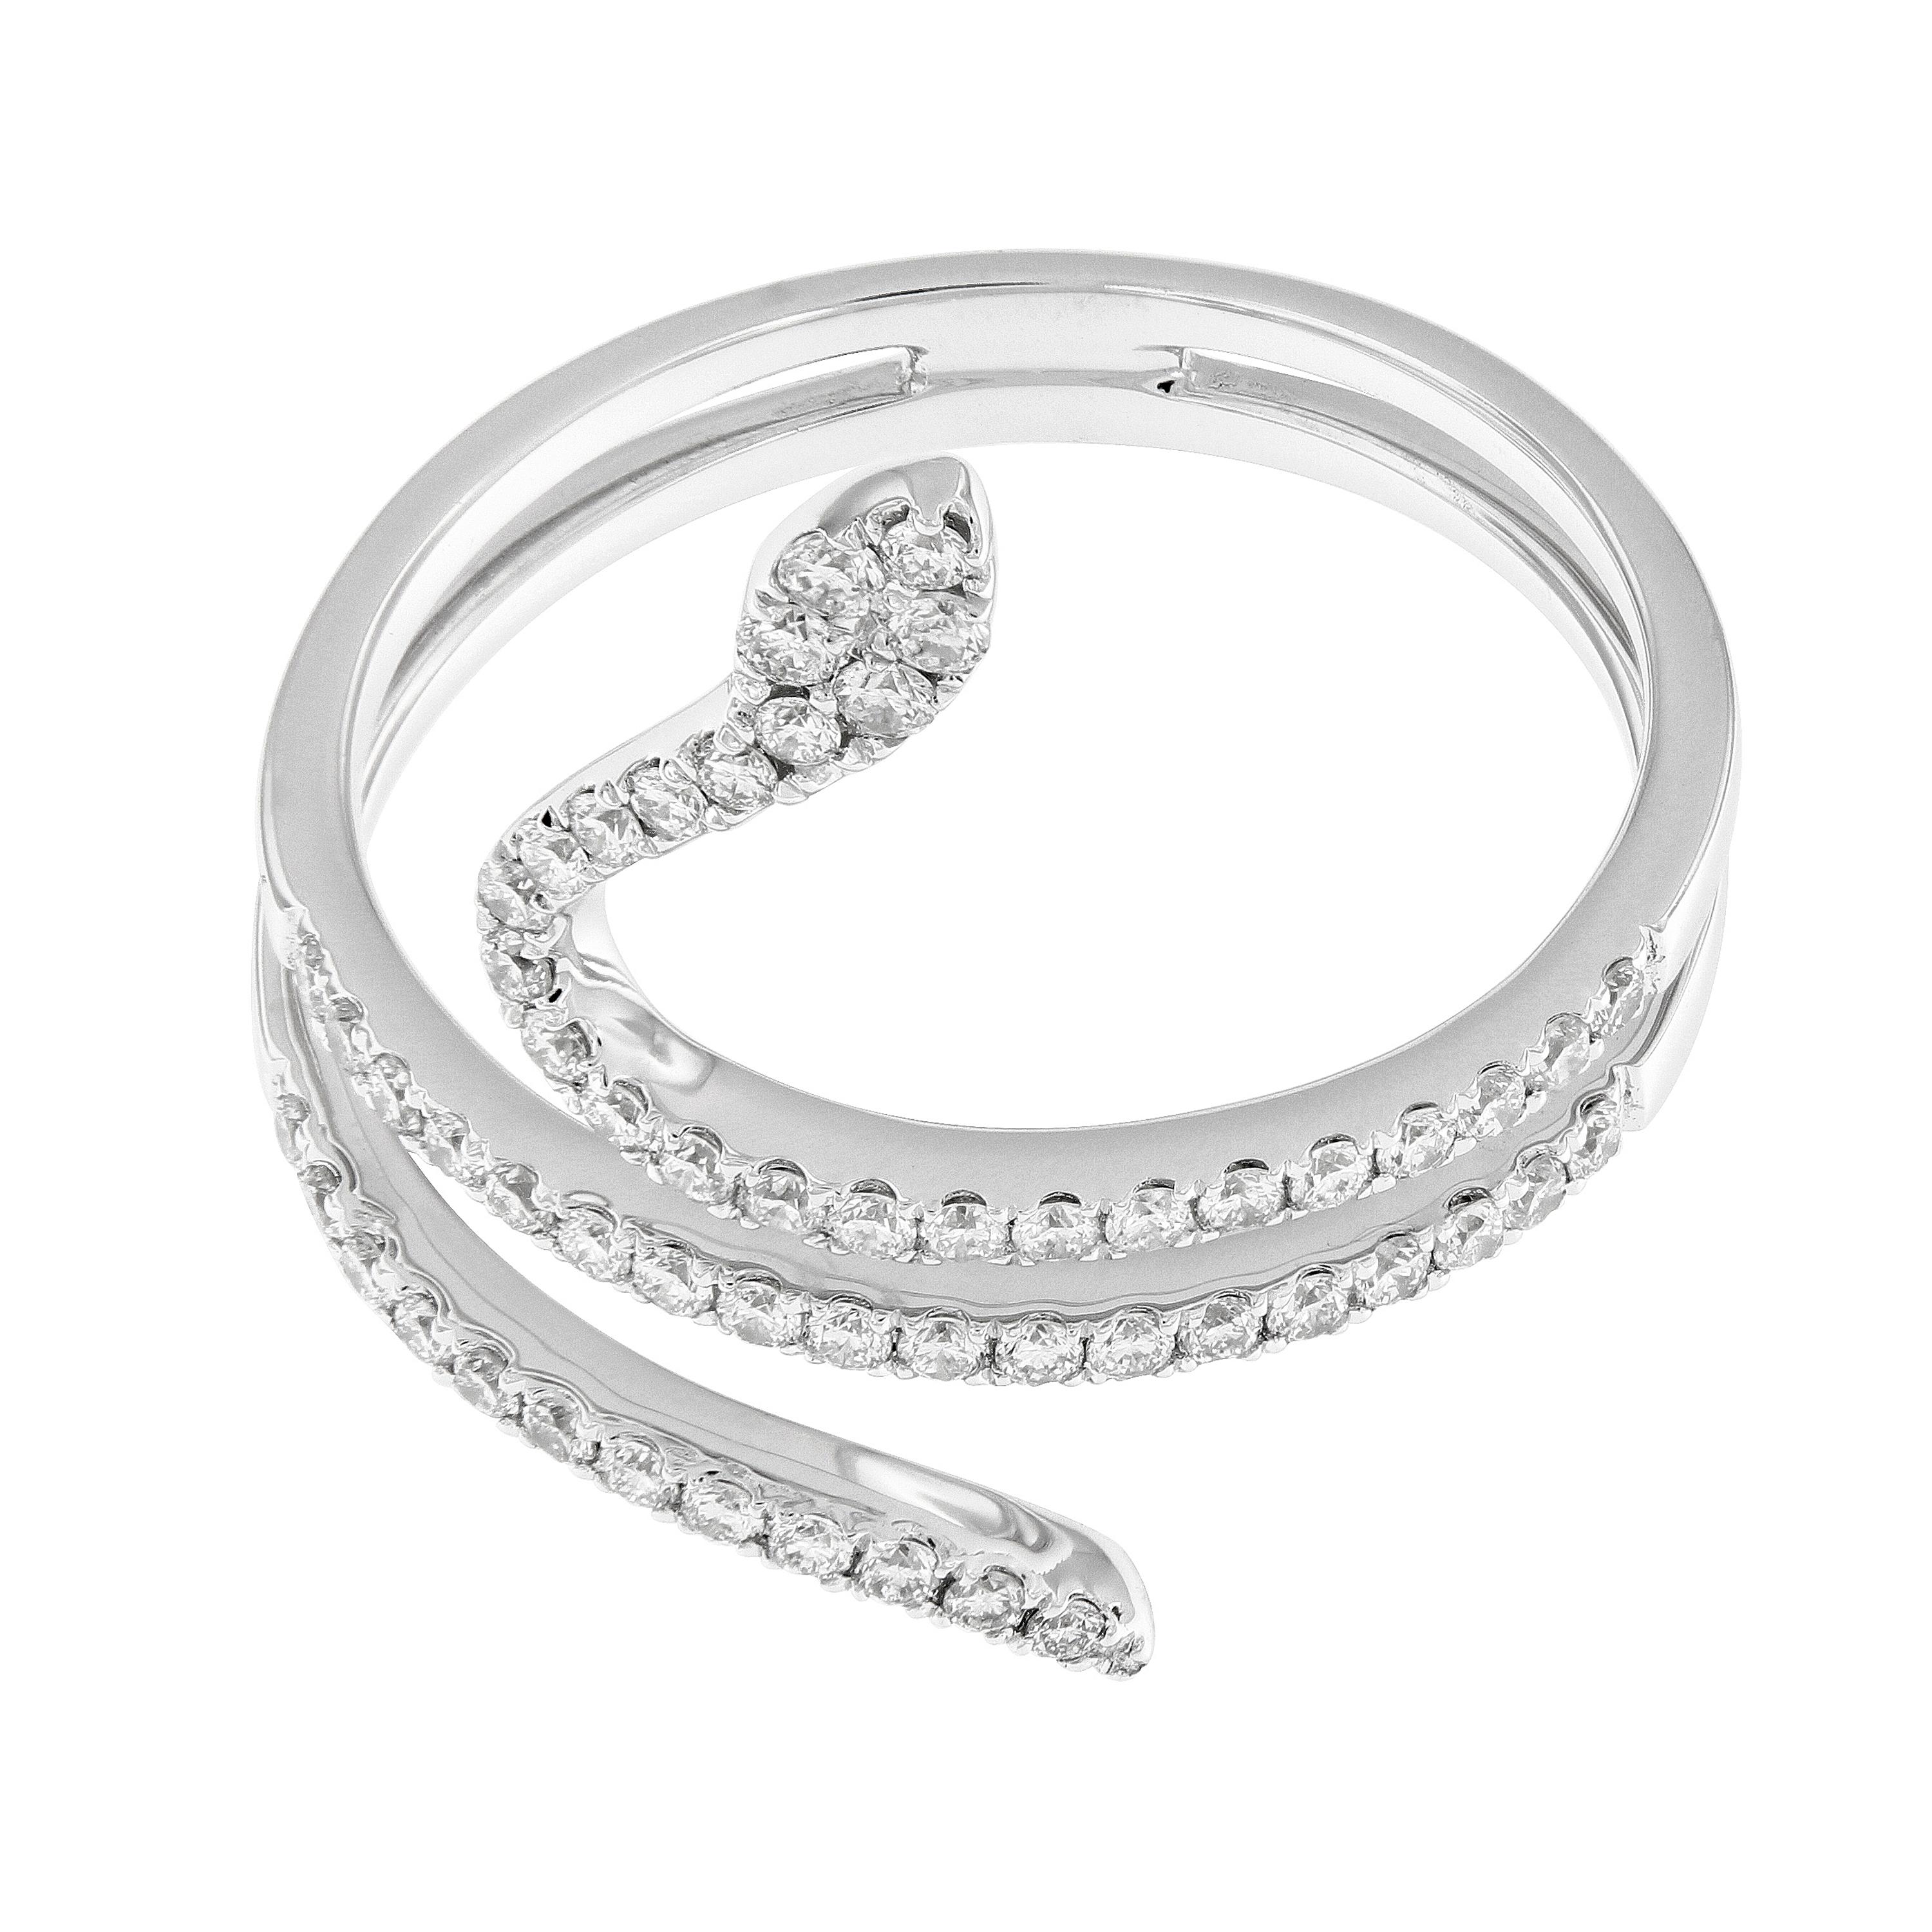 This contemporary serpent ring beautifully wraps around your finger. Ring is crafted in 18 karat white gold and features 56 round brilliant cut diamonds. Ring size 6.5. Weighs 3 grams.

Diamonds 0.35 cttw, VS, G-H